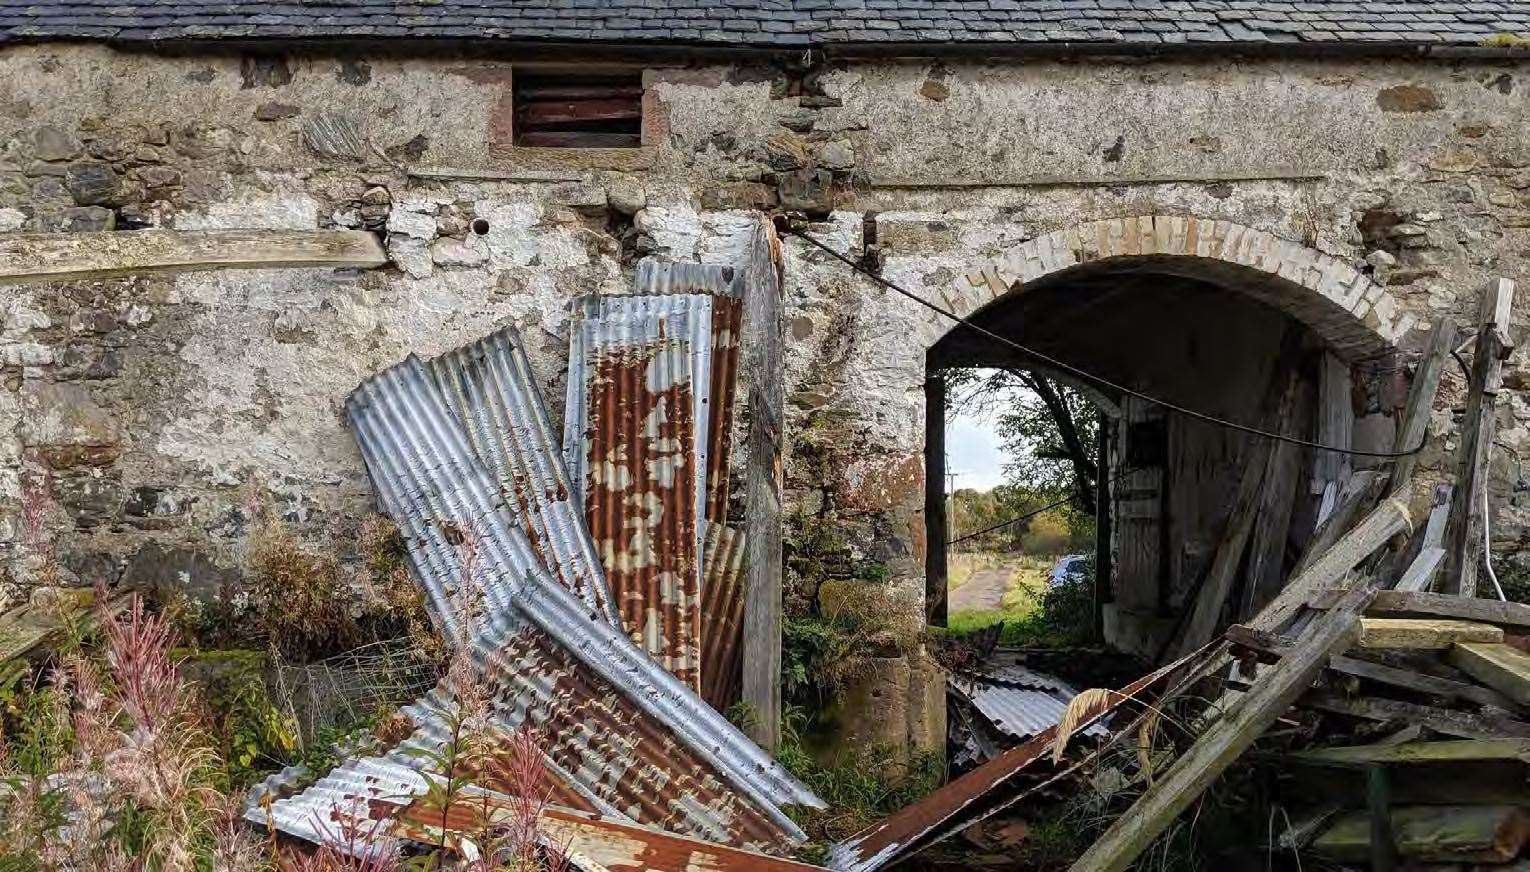 The proposal is to turn the derelict building into a rural holiday retreat.